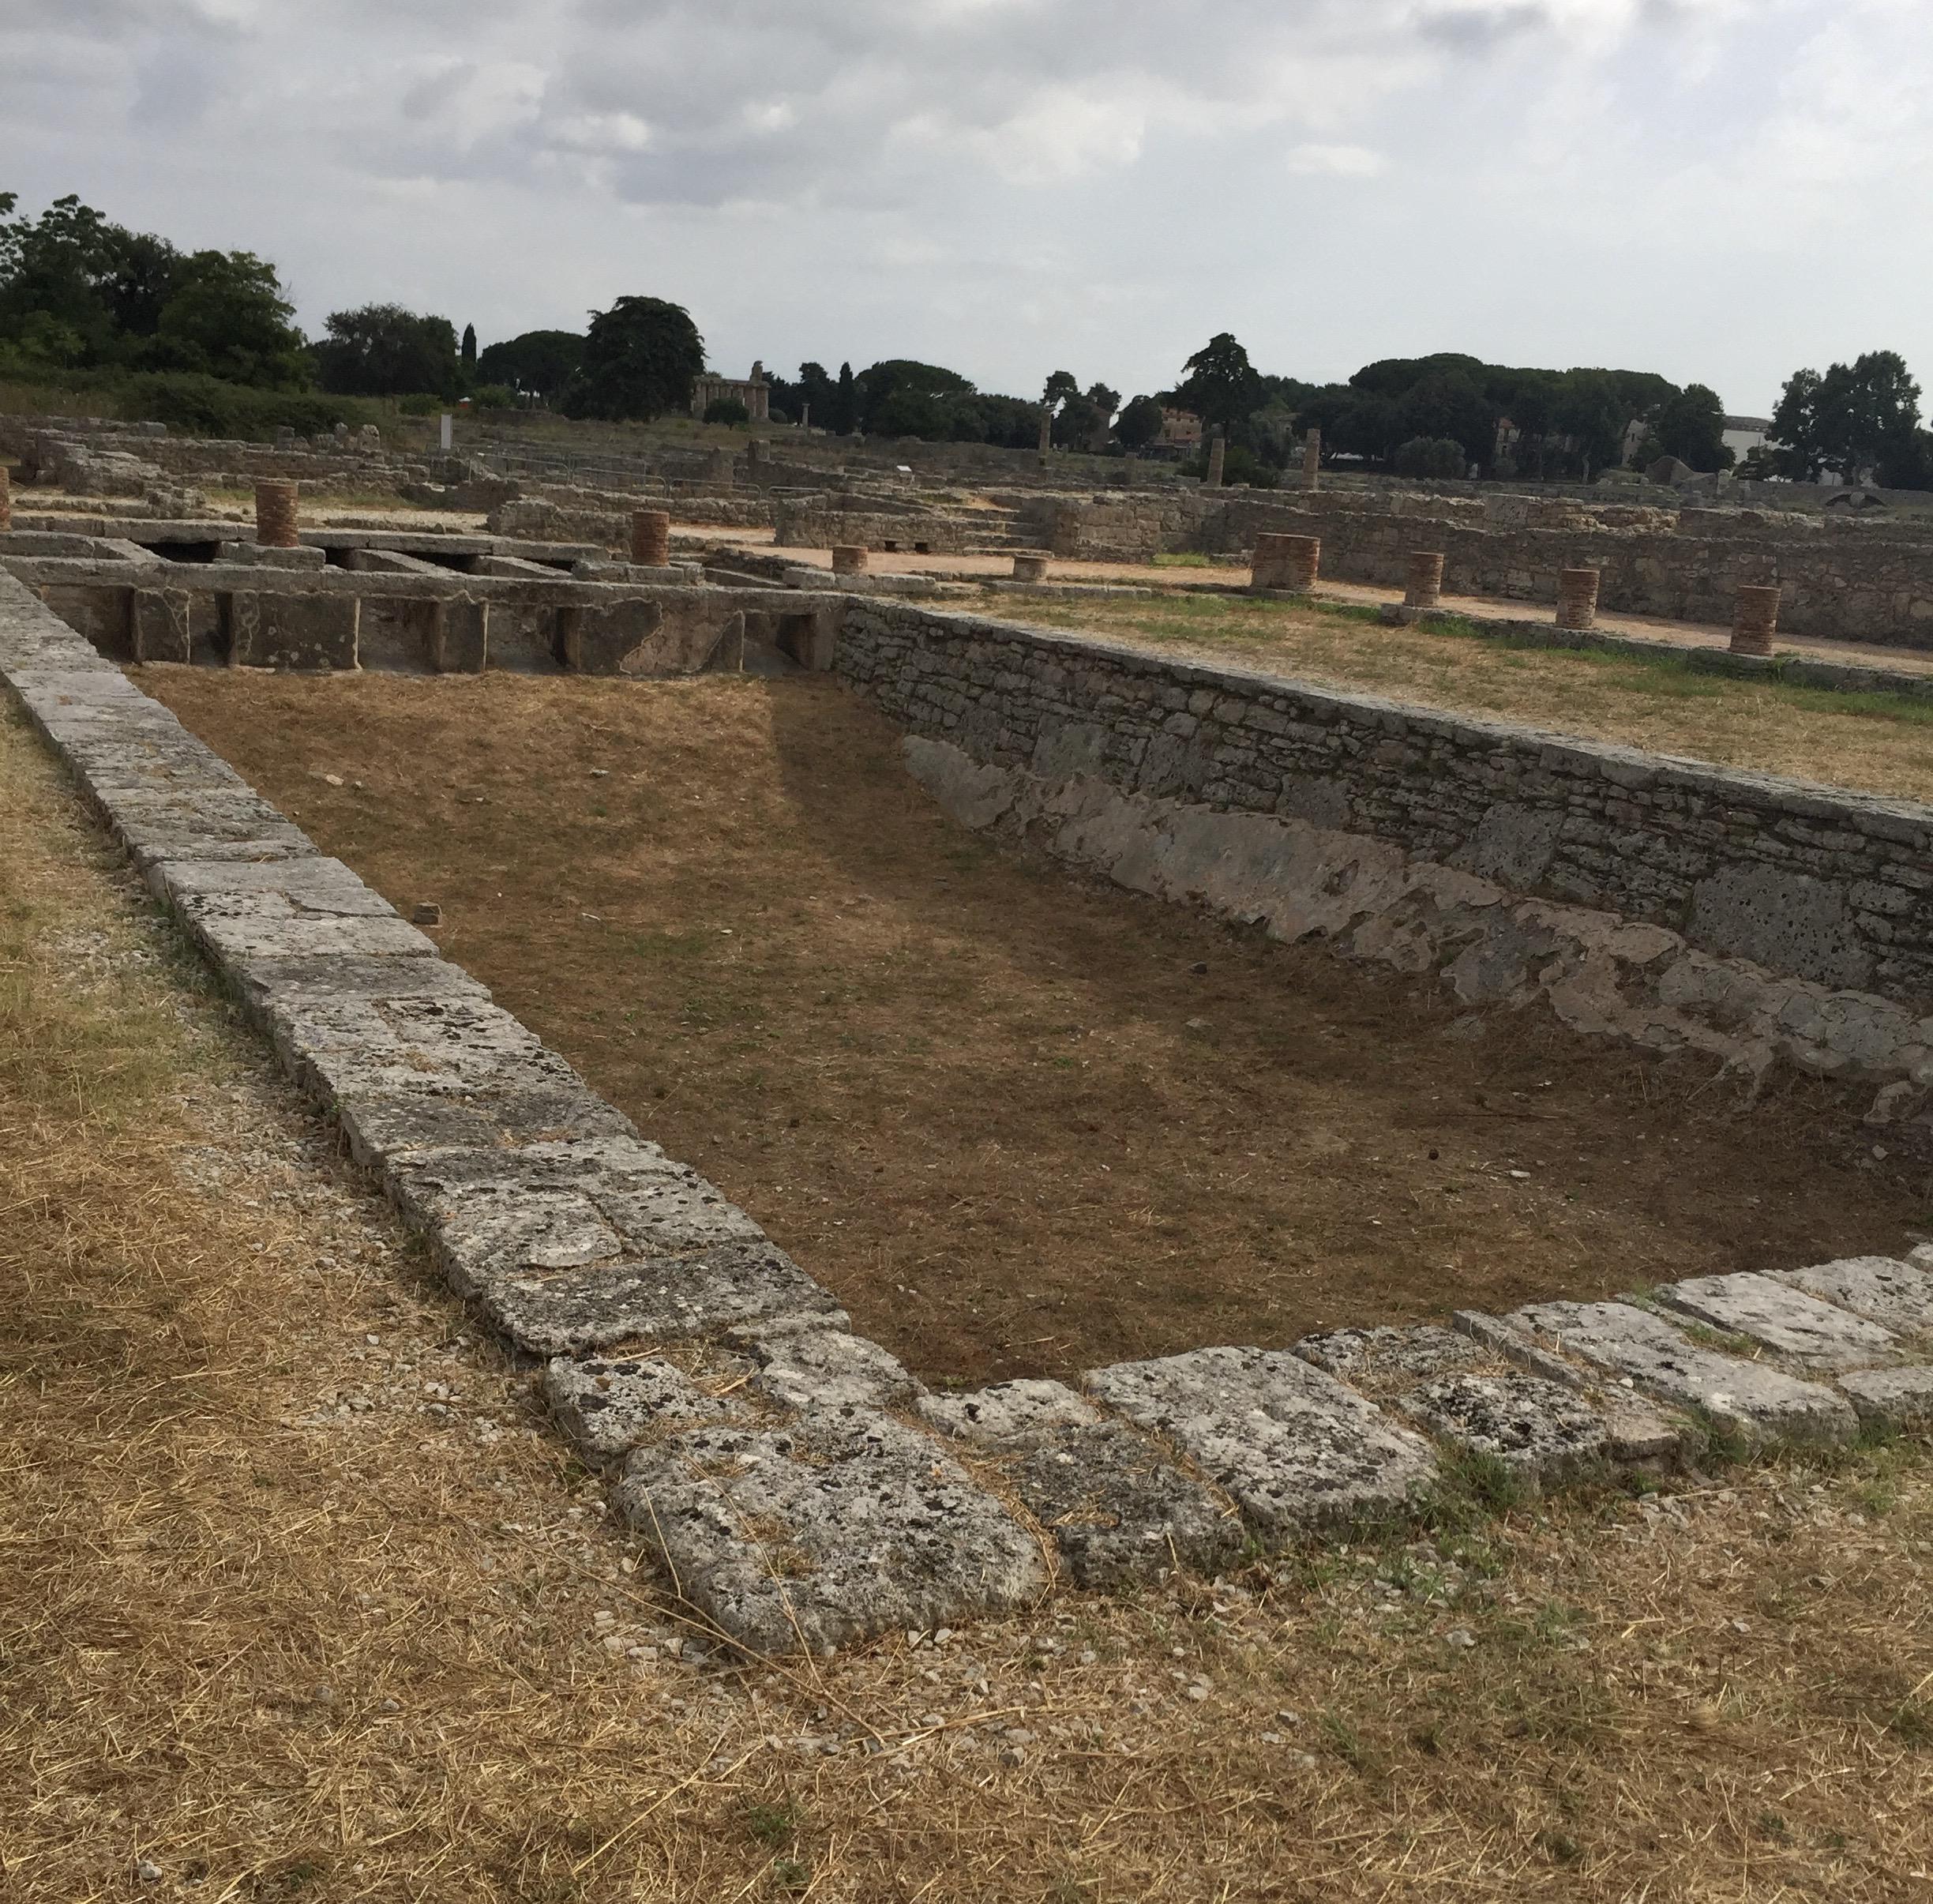 This pool was the centerpiece of a 27,000 square-foot Roman villa, built around the 3rd century CE in Paestum, Italy.